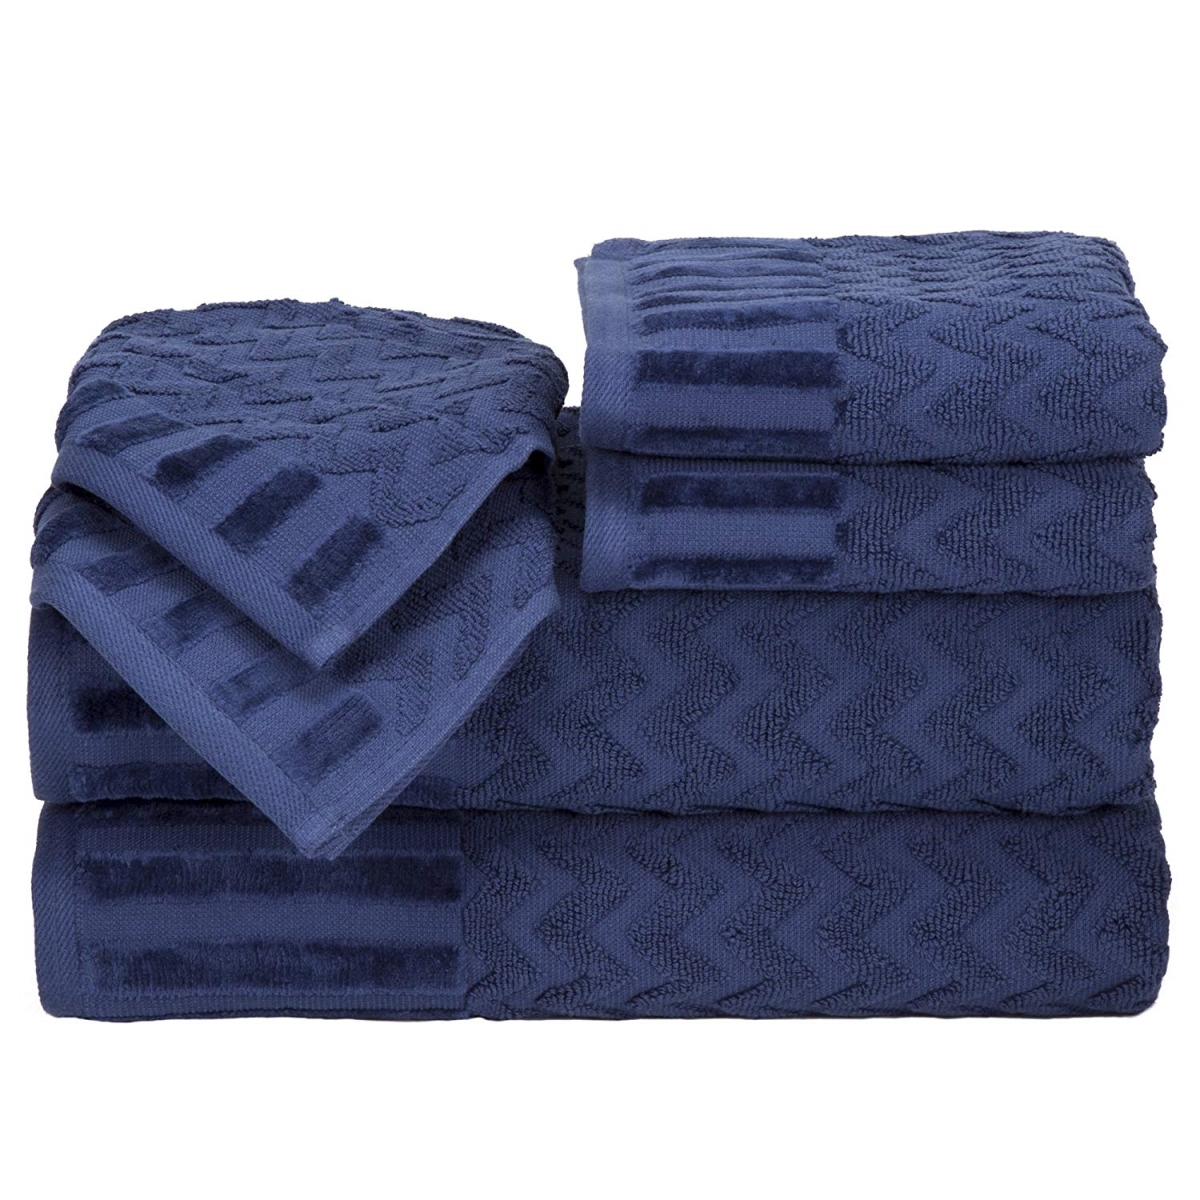 Picture of Bedford Home 67A-27599 6 Piece Cotton Deluxe Plush Bath Towel Set - Navy